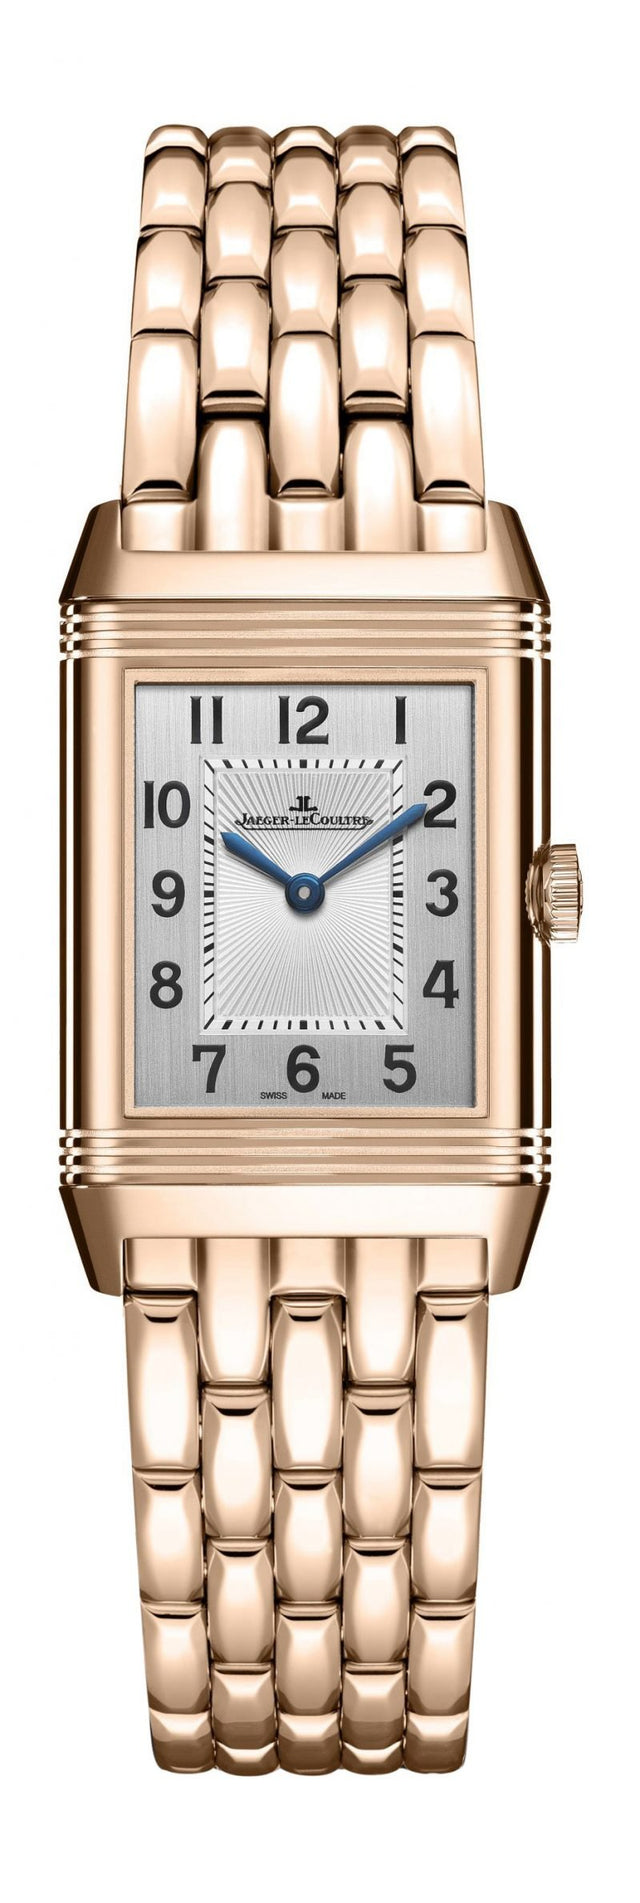 Jaeger-LeCoultre Reverso Classic Duetto Woman's watch Q2662130